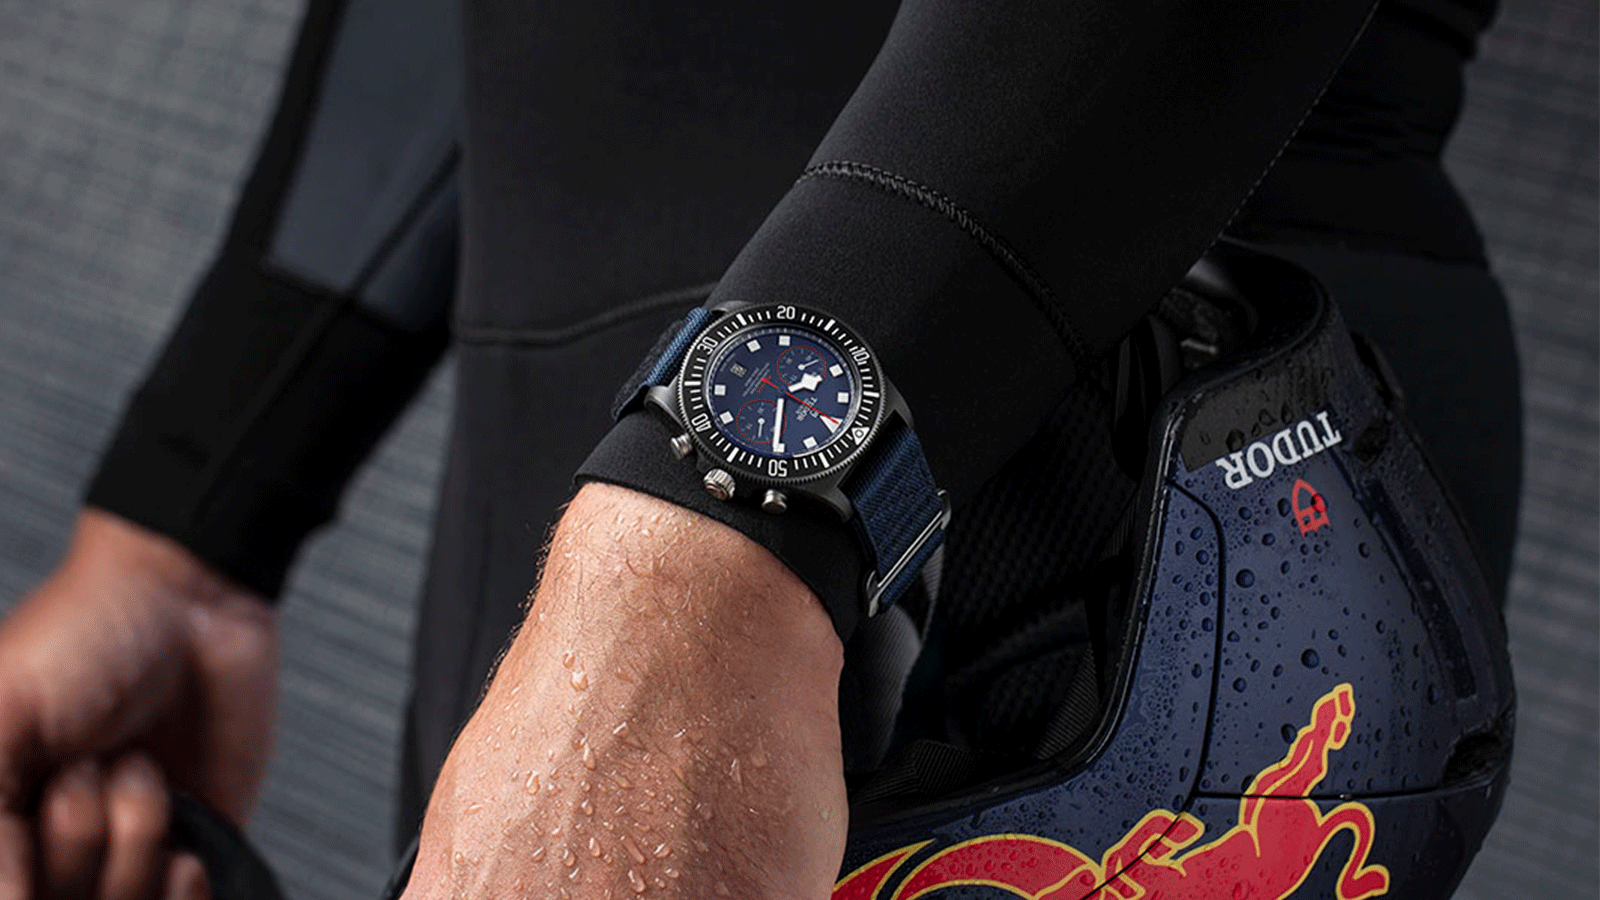 Beyond the 100% Swiss sailing crew, Alinghi Red Bull Racing brings together cutting-edge skills, particularly in the field of design. TUDOR honours its partner with the new Pelagos FXD "Alinghi Red Bull Racing Edition".